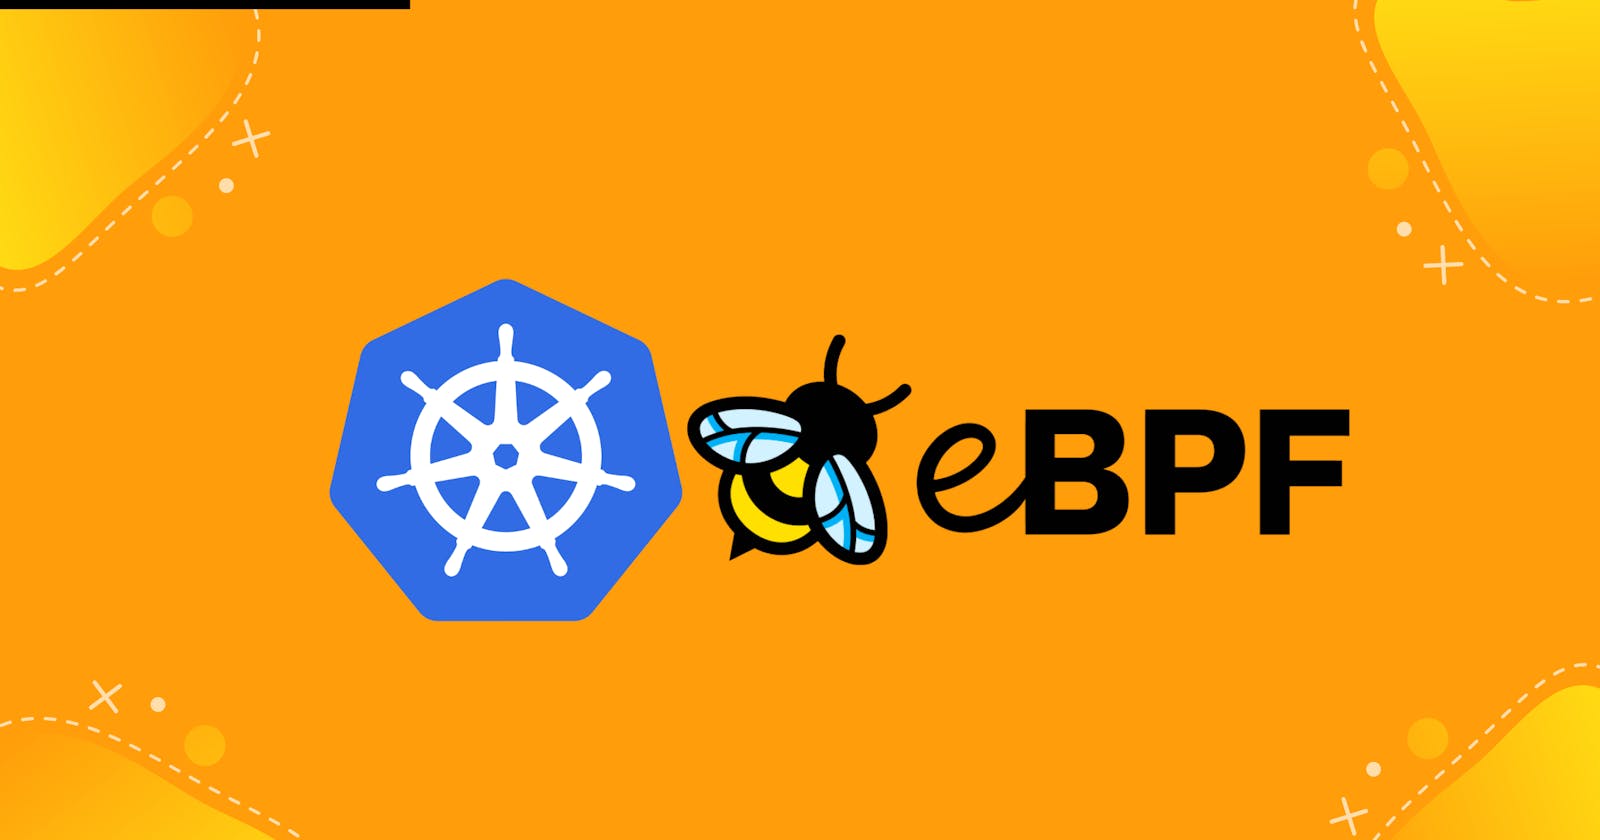 eBPF, Service Mesh and Sidecar